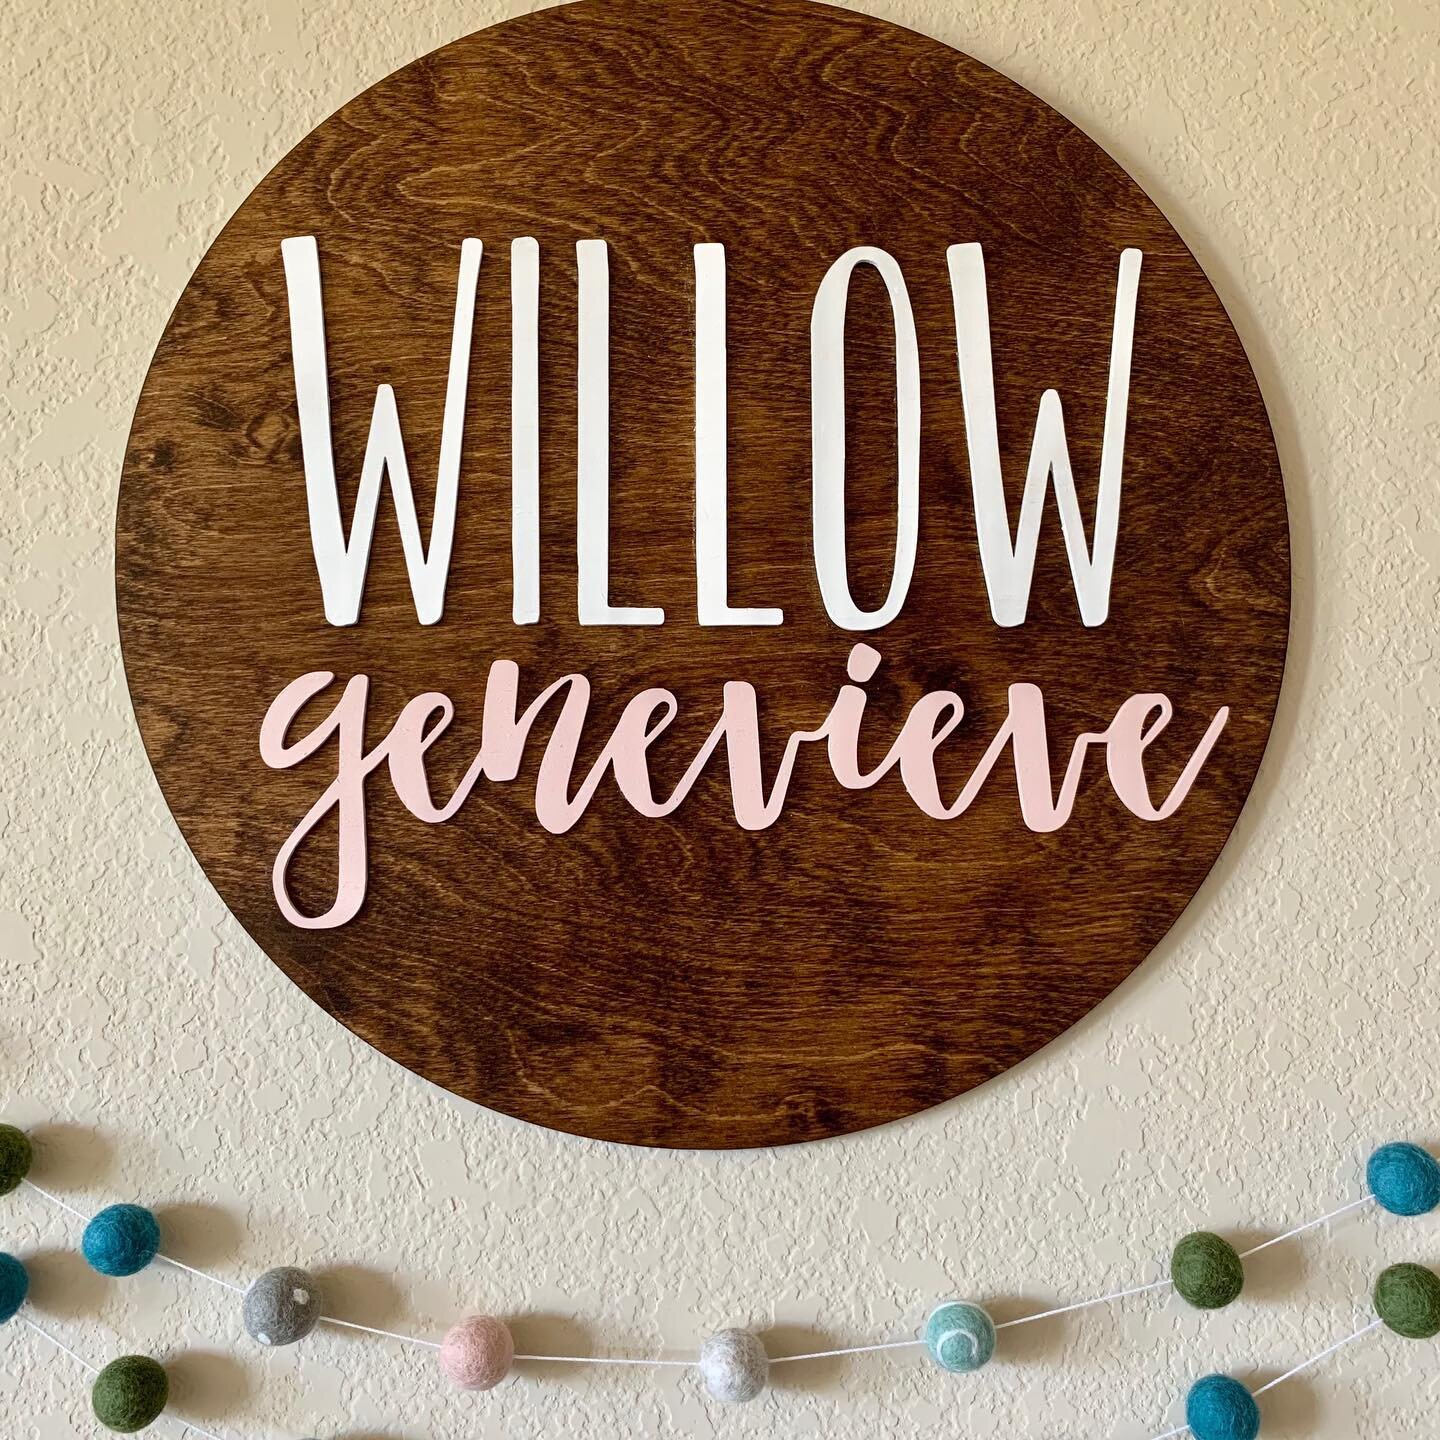 Miss Willow is already a month old! I loved being in the inside circle and knowing her name before she even arrived! 

Baby room art is just precious! I’ve got some new things coming in terms of customization options and a cool collab! Stay tuned. 😉